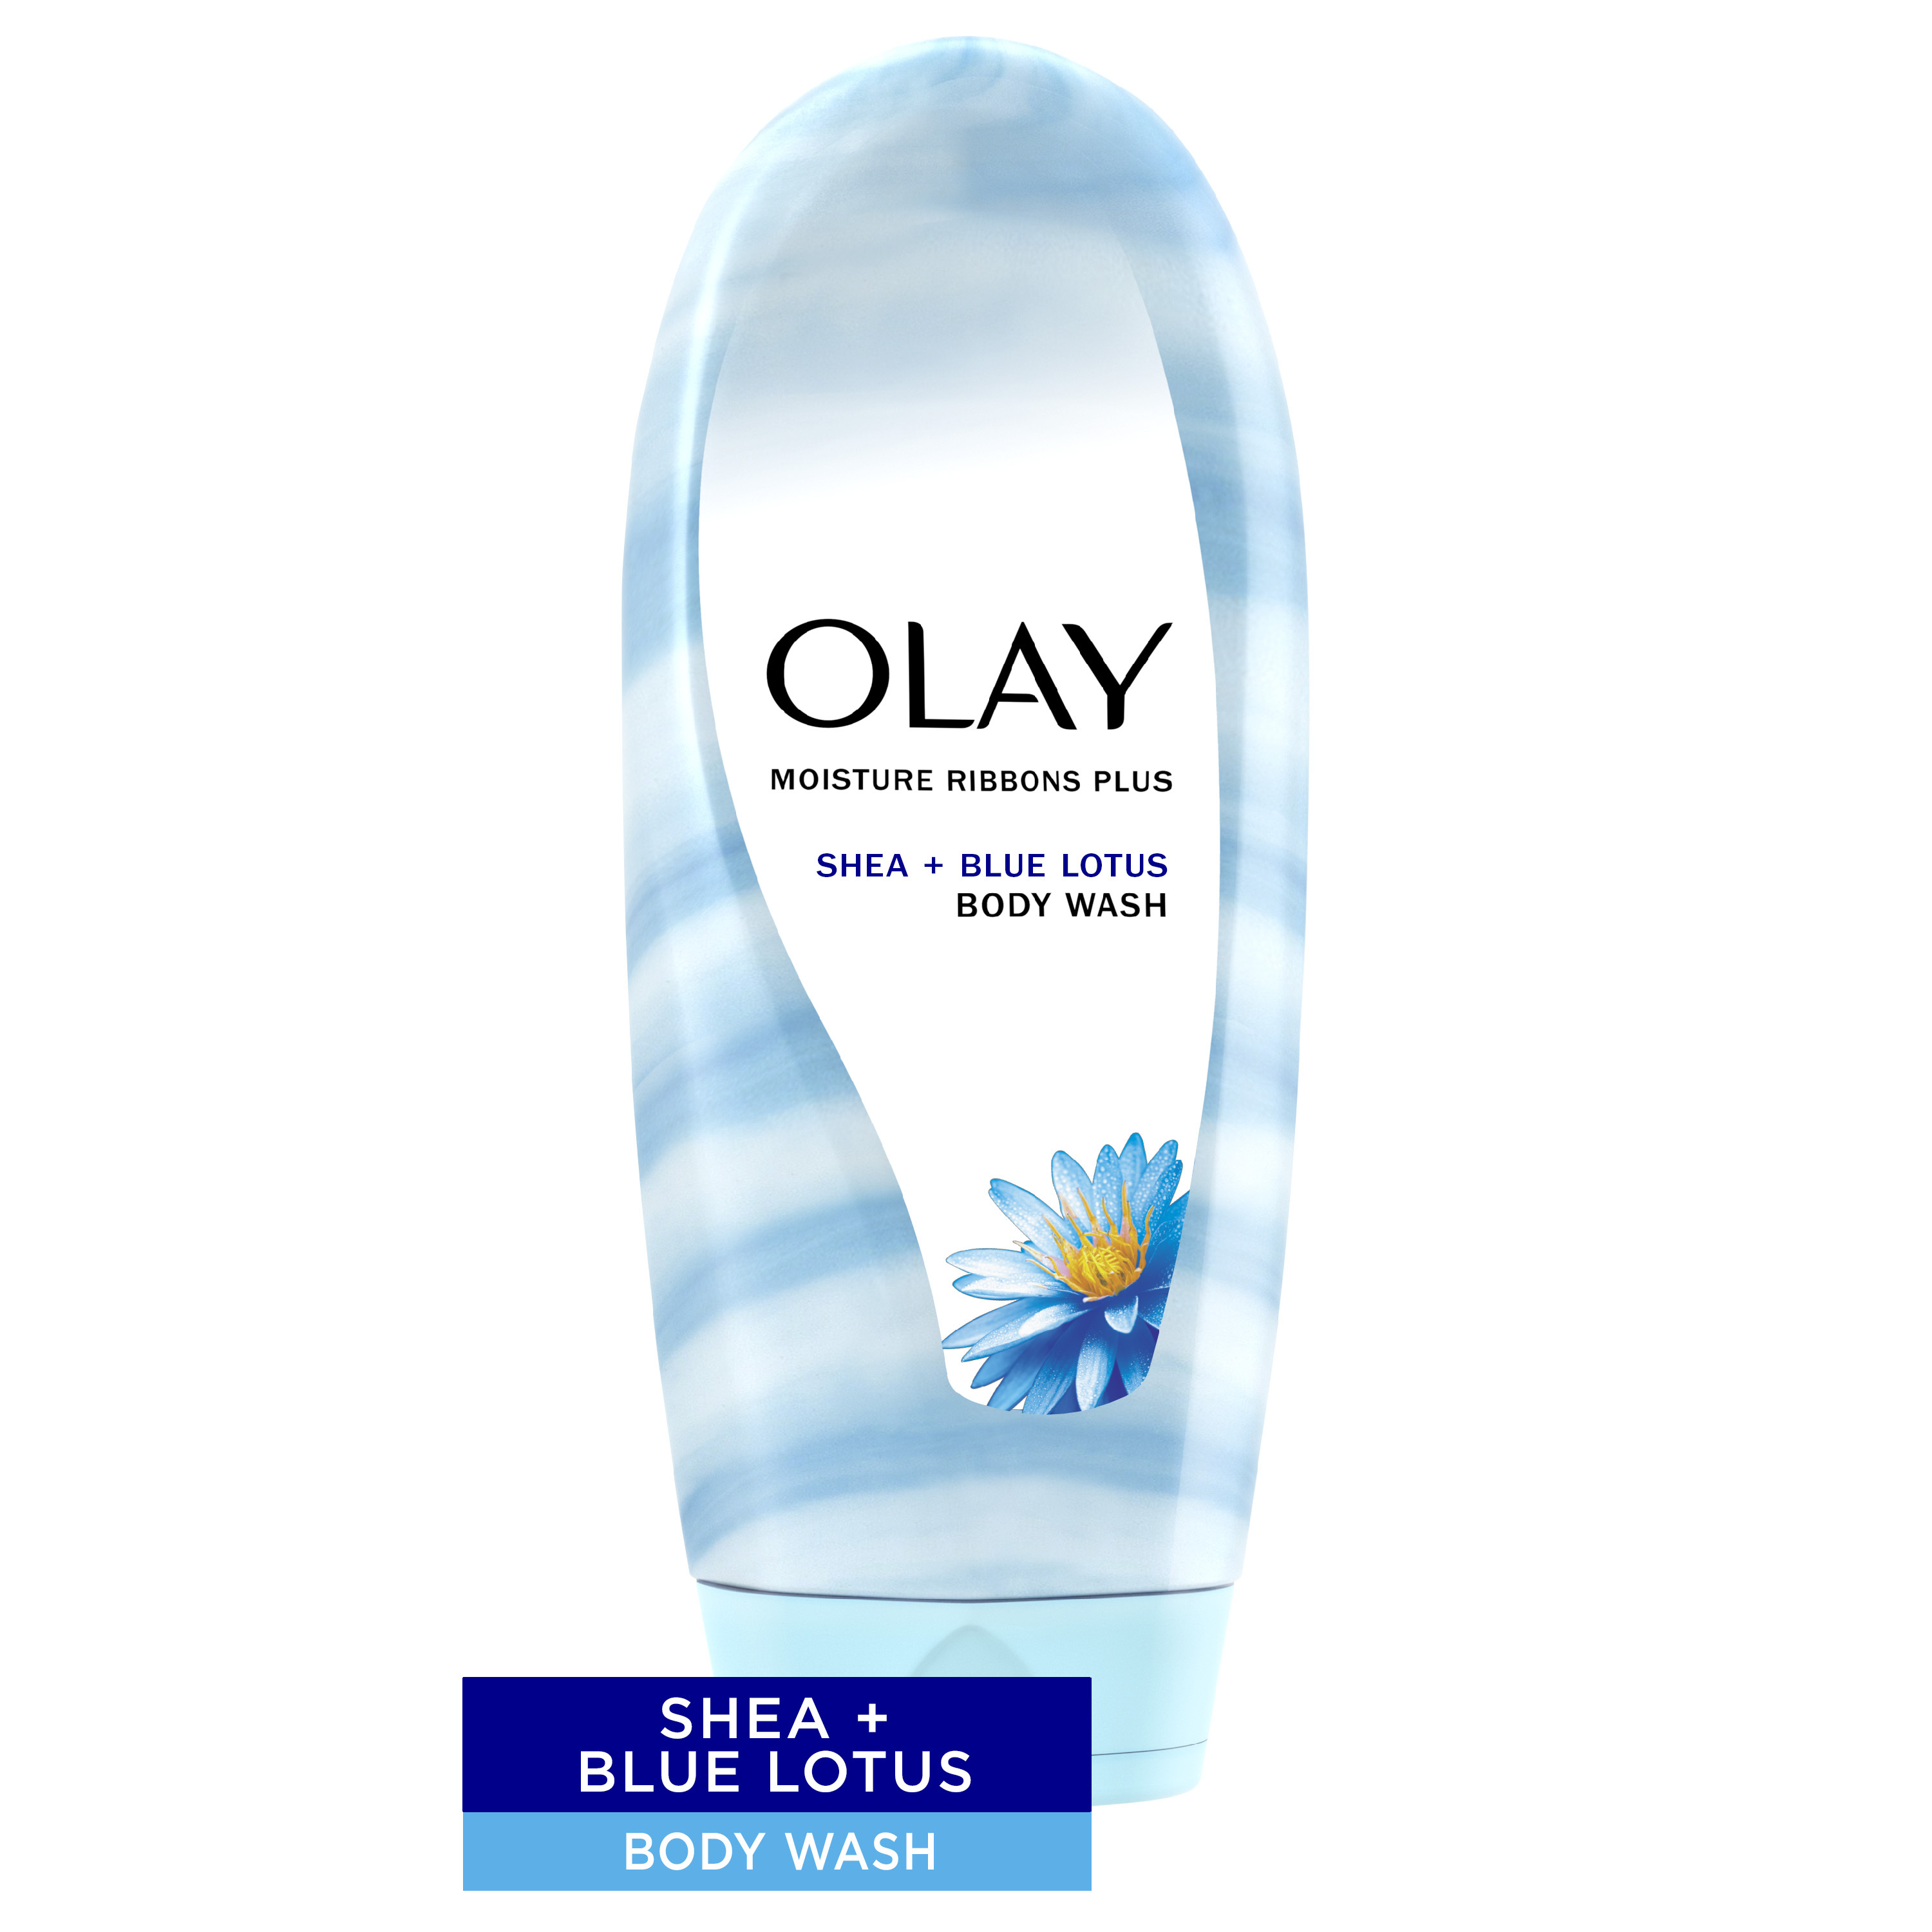 Olay Moisture Ribbons Plus Body Wash for Women, Shea and Blue Lotus, for All Skin Types, 18 fl oz - image 1 of 7